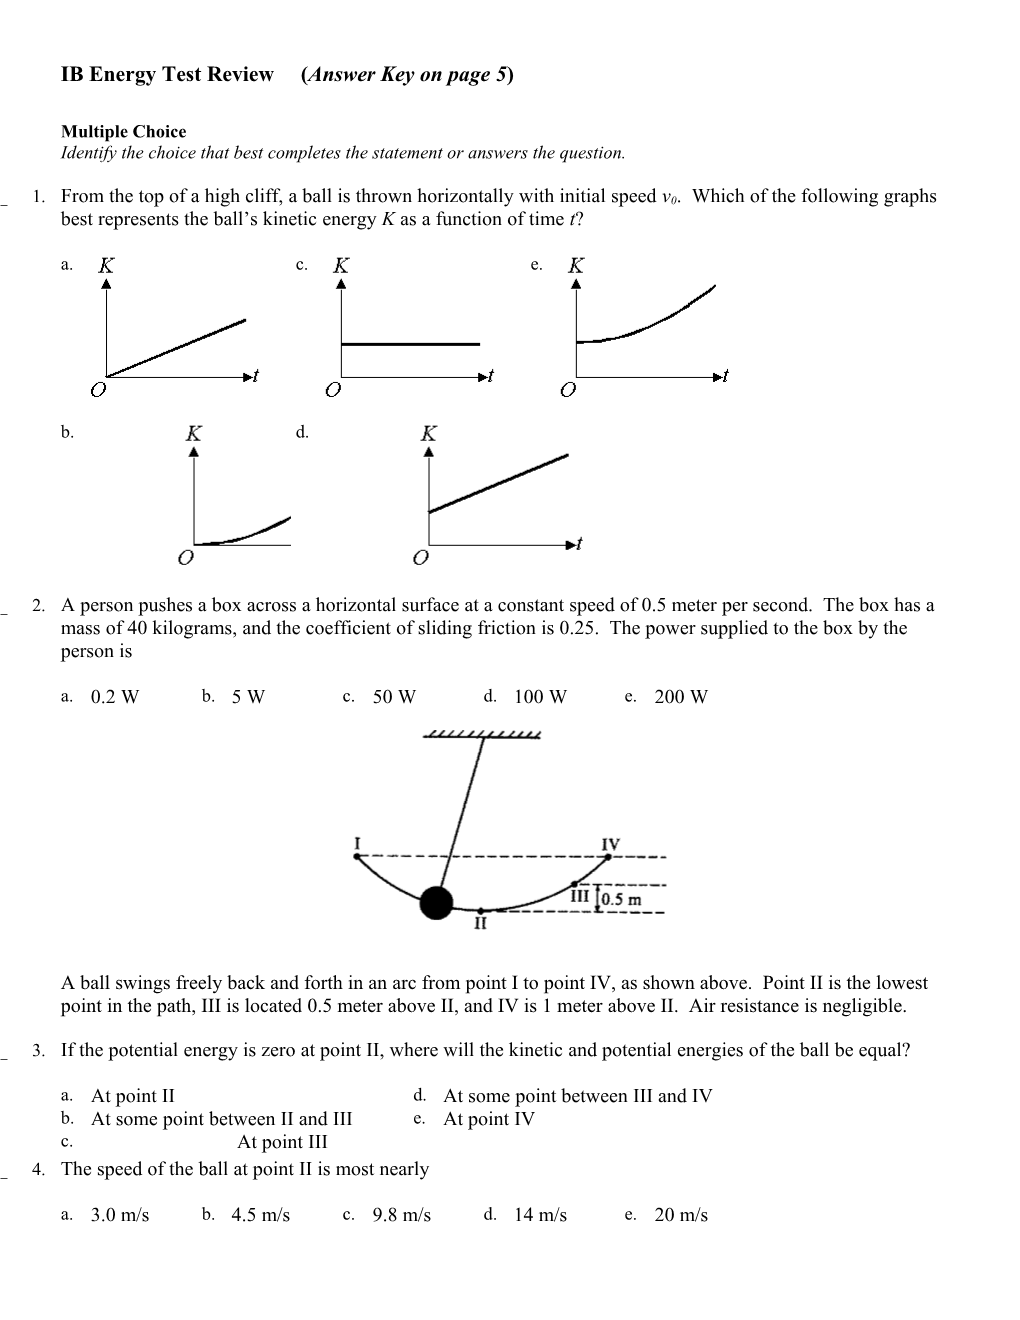 IB Energy Test Review(Answer Key on Page 5)